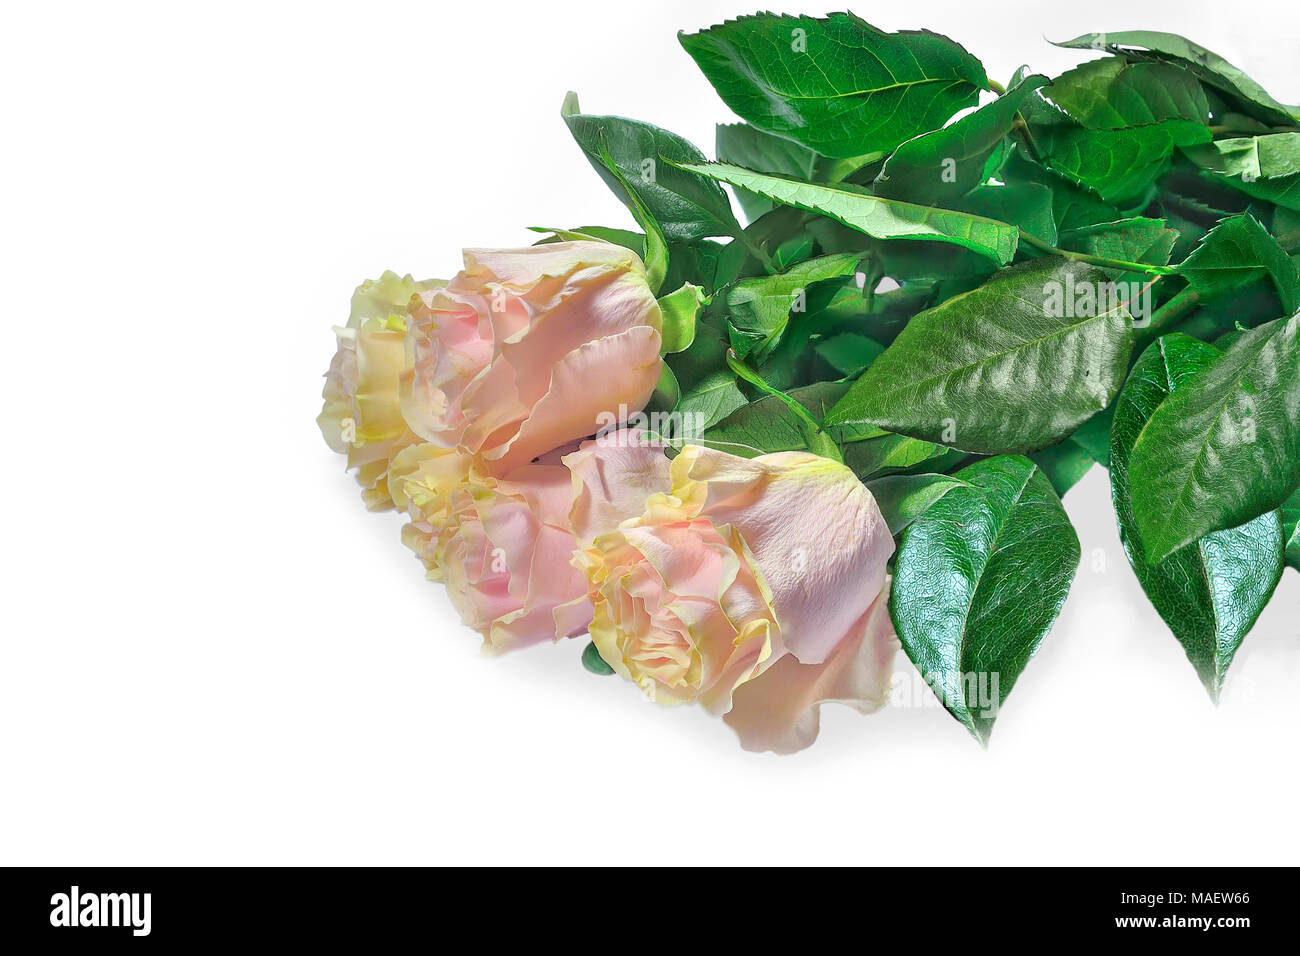 Beautiful bouquet of delicate pale pink roses with yellow tint and green leaves isolated on white - festive floral background Stock Photo